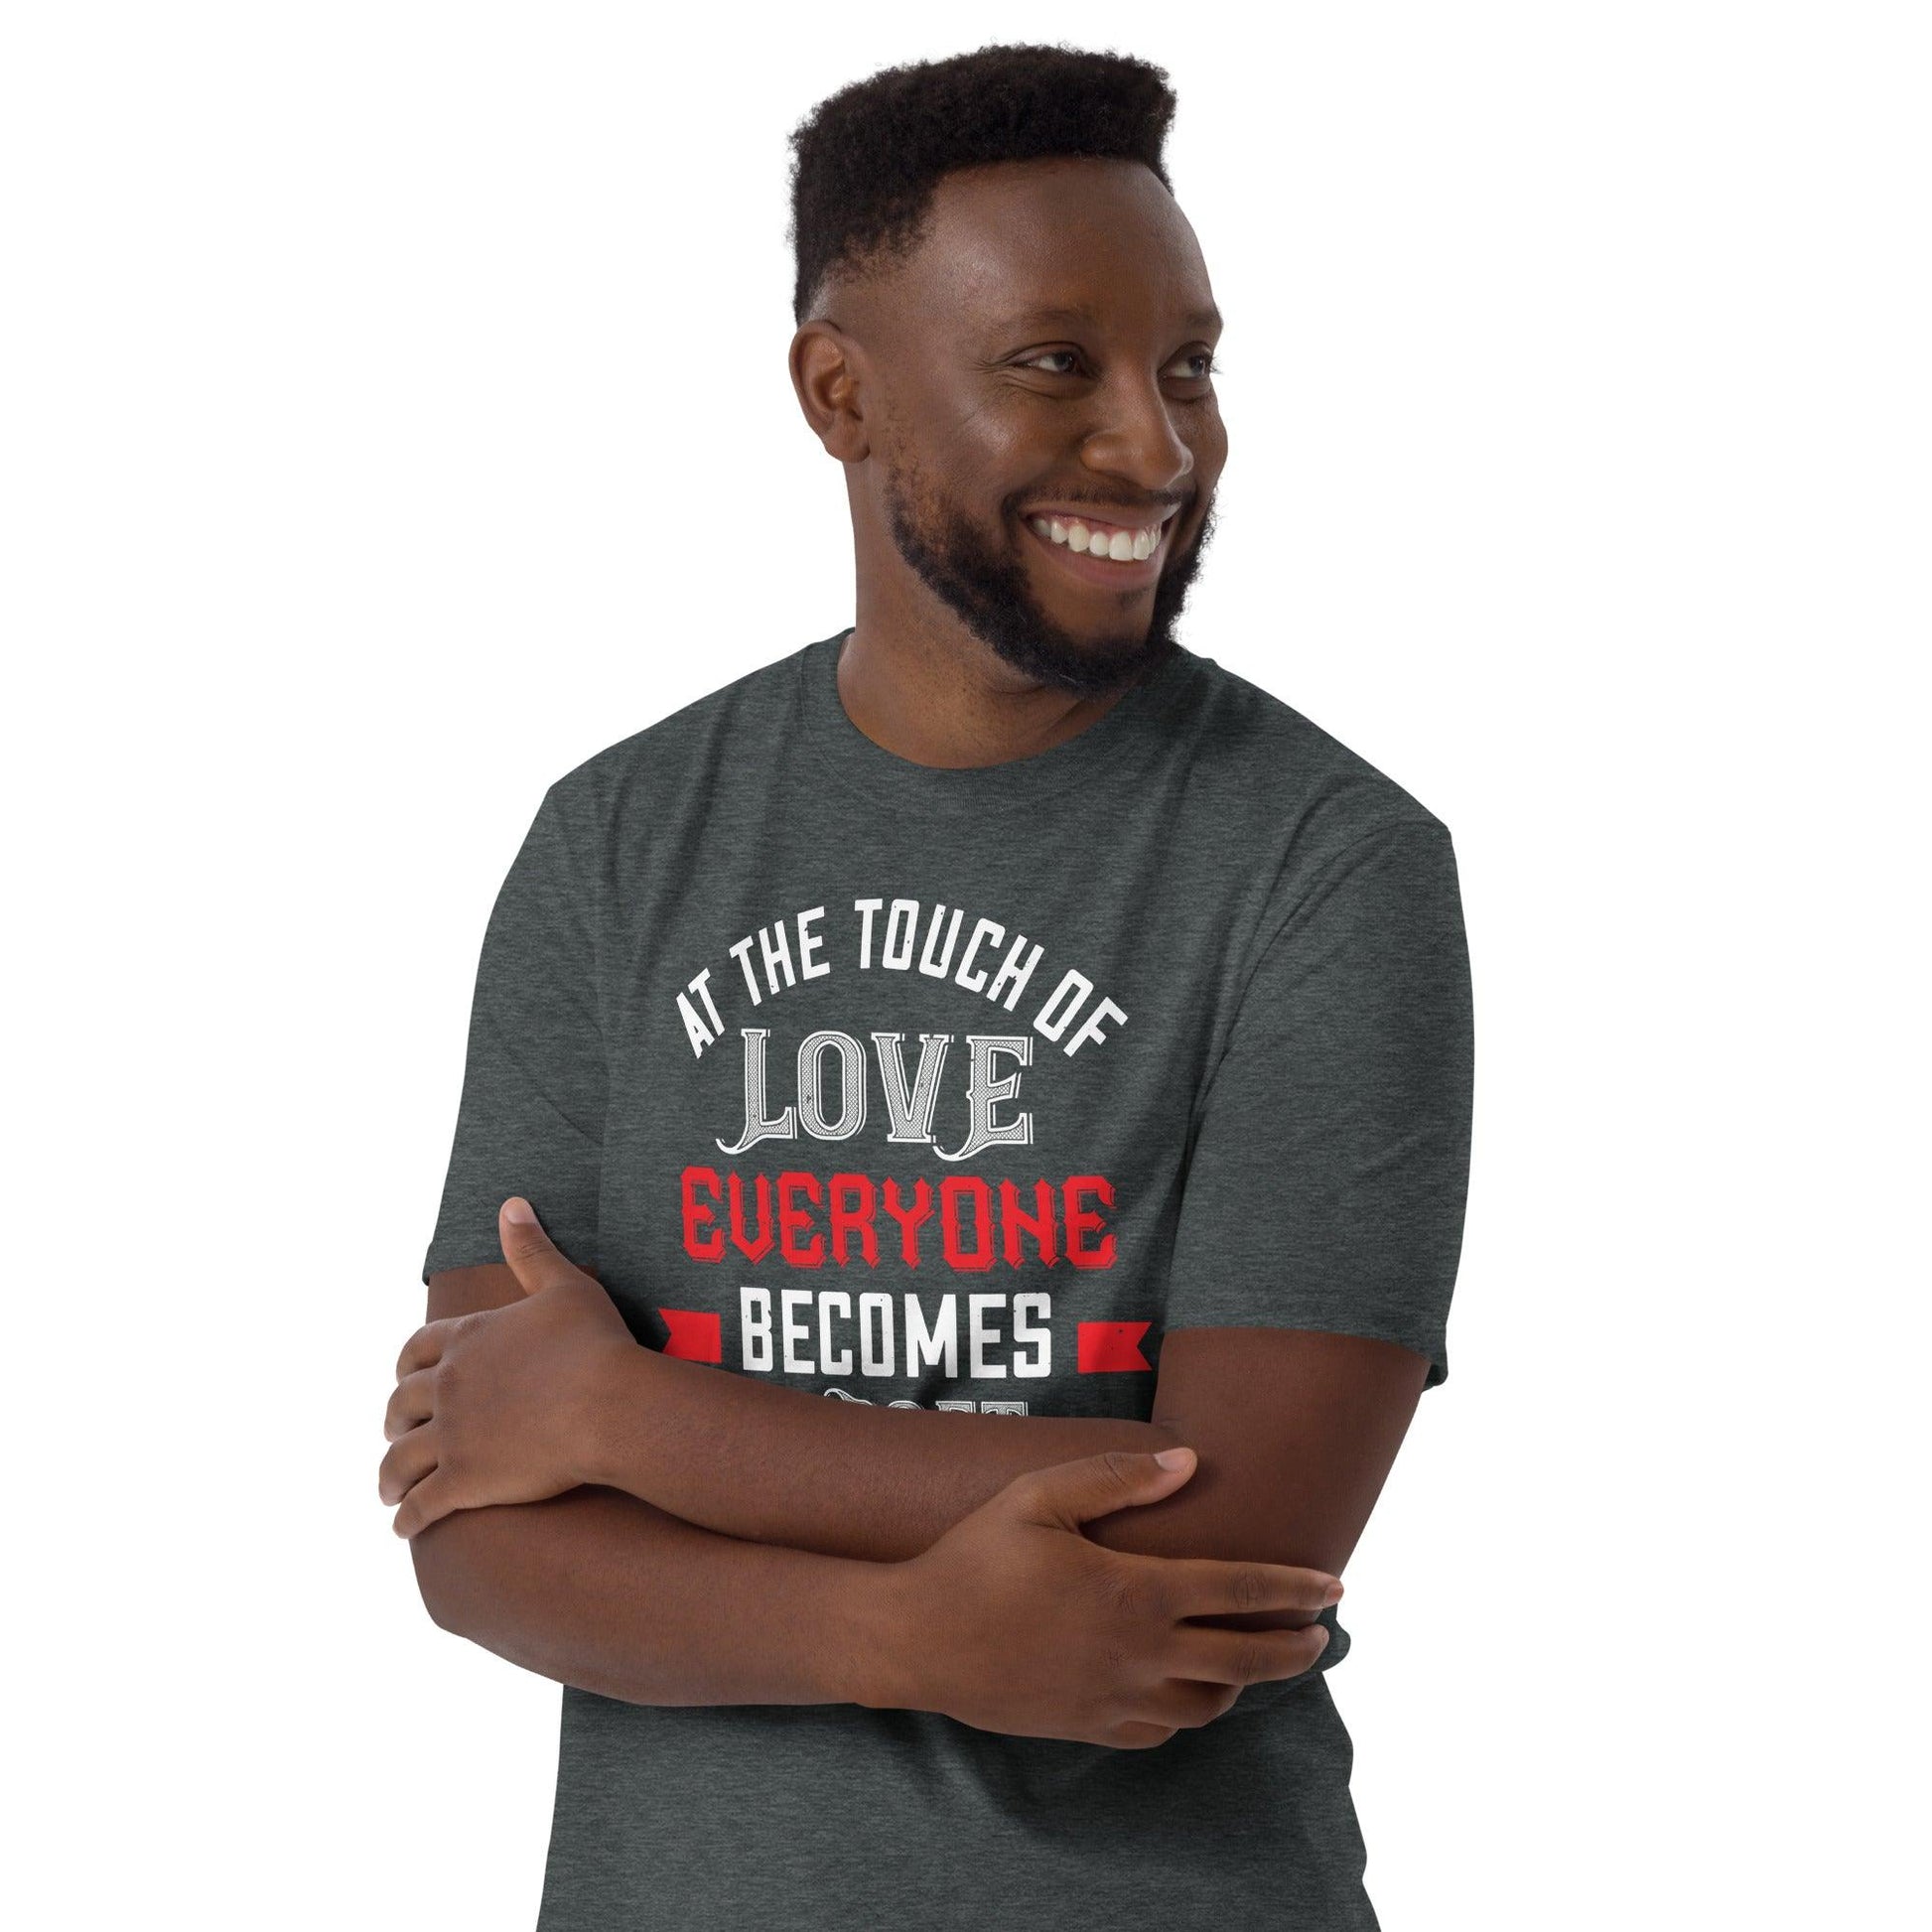 Short-Sleeve Unisex T-Shirt At The Touch Of Love Everyone Becomes A Poet - Canvazon